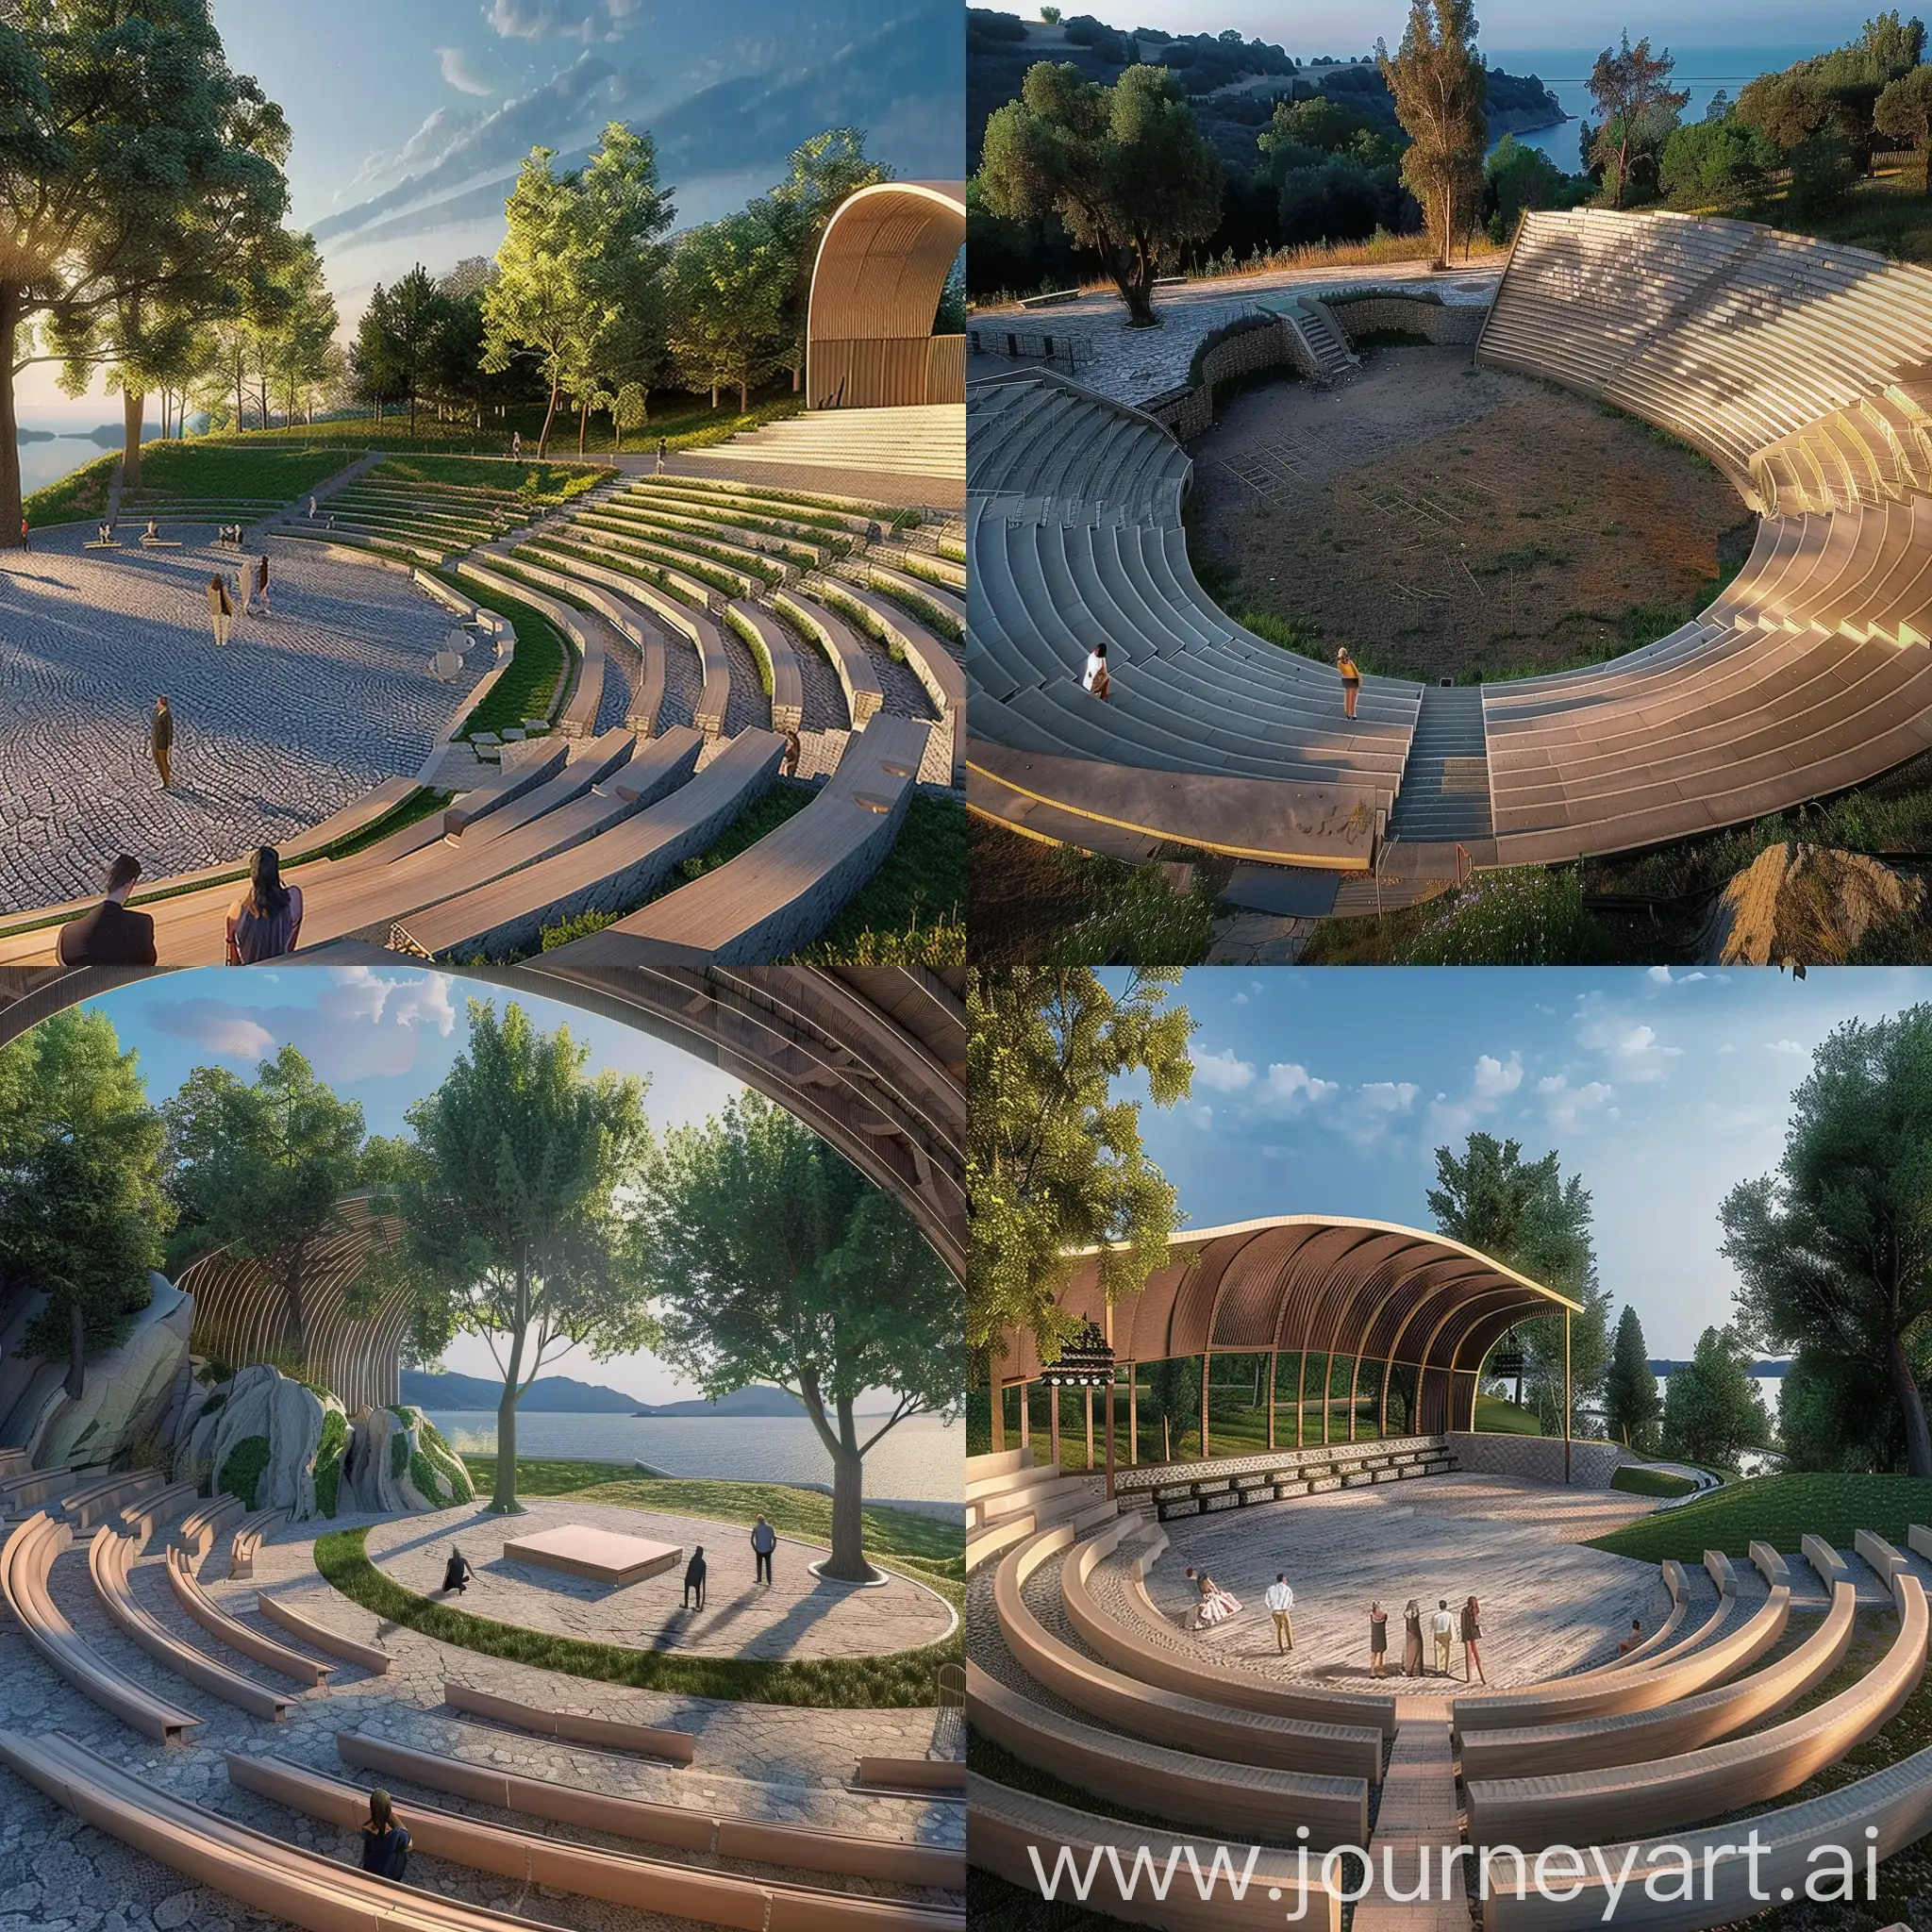 We need to refine this amphitheater and make it better